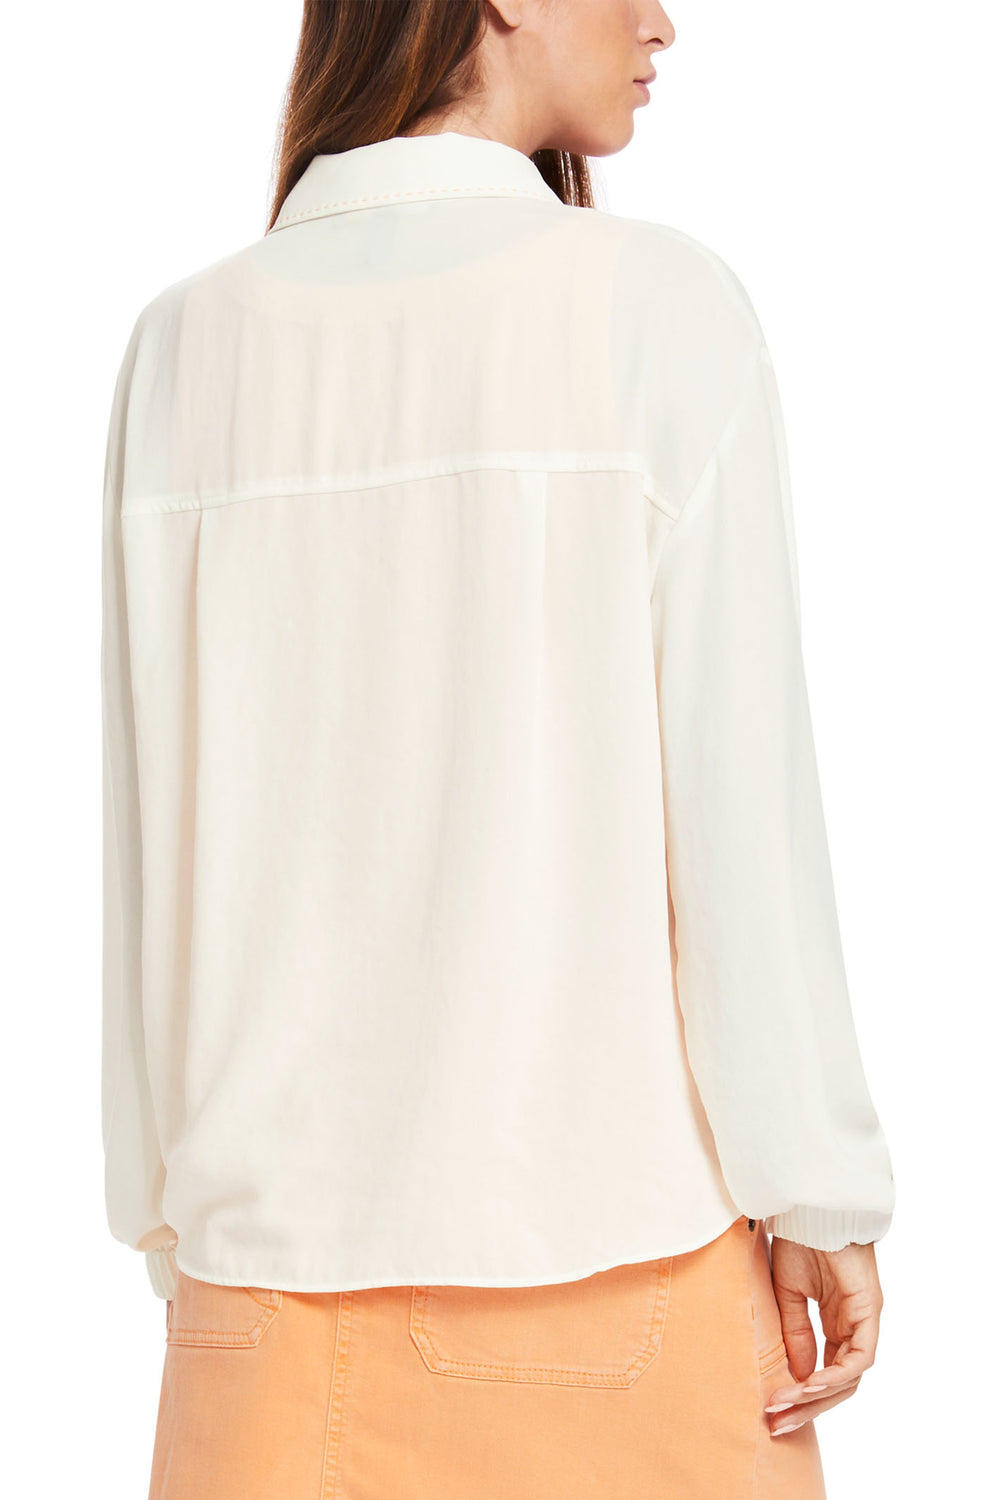 Marc Cain Sports Shirt Off White Cream Relaxed Fit XS 51.08 W41 110 - Olivia Grace Fashion